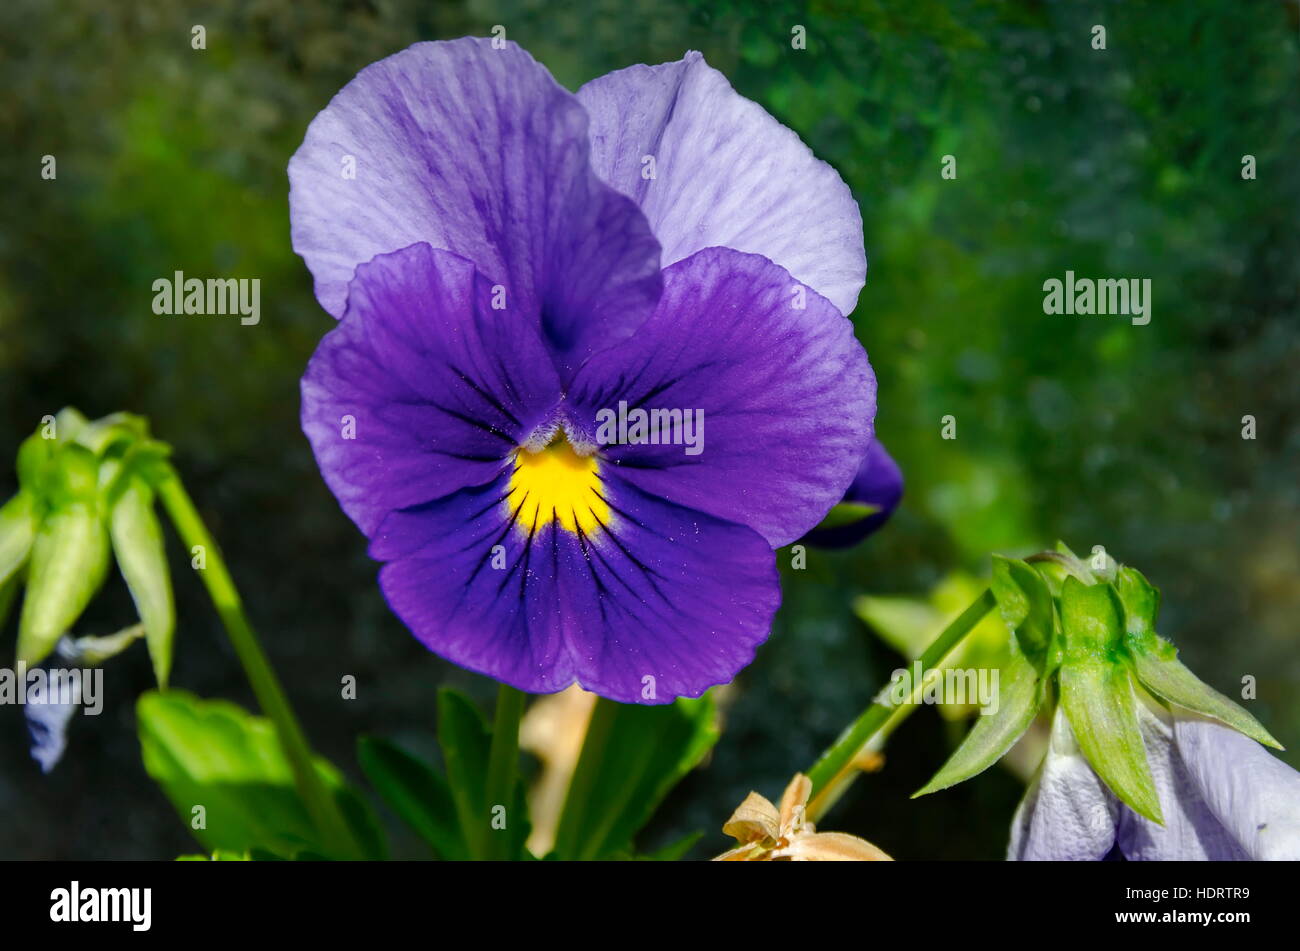 Purple pansy, Viola altaica or dog-violet flower in glade with yellow pollen,  Vitosha mountain, Bulgaria Stock Photo